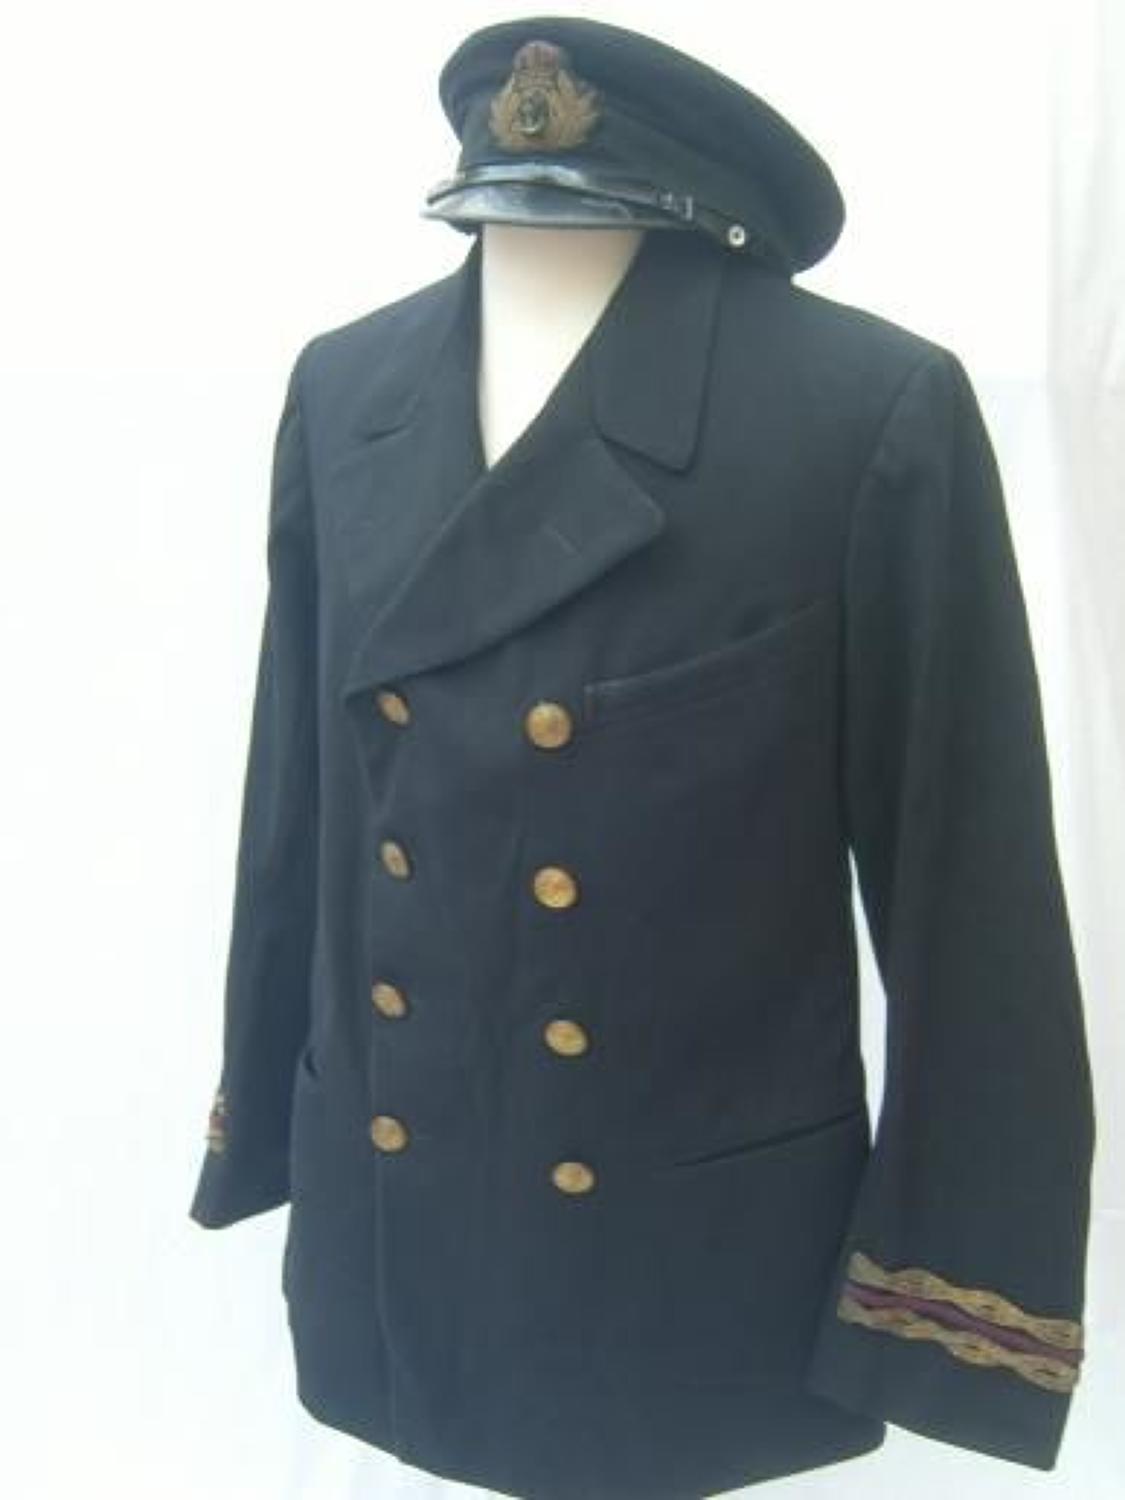 1915 DATED TUNIC & CAP TO ROYAL NAVAL RESERVE OFFICER